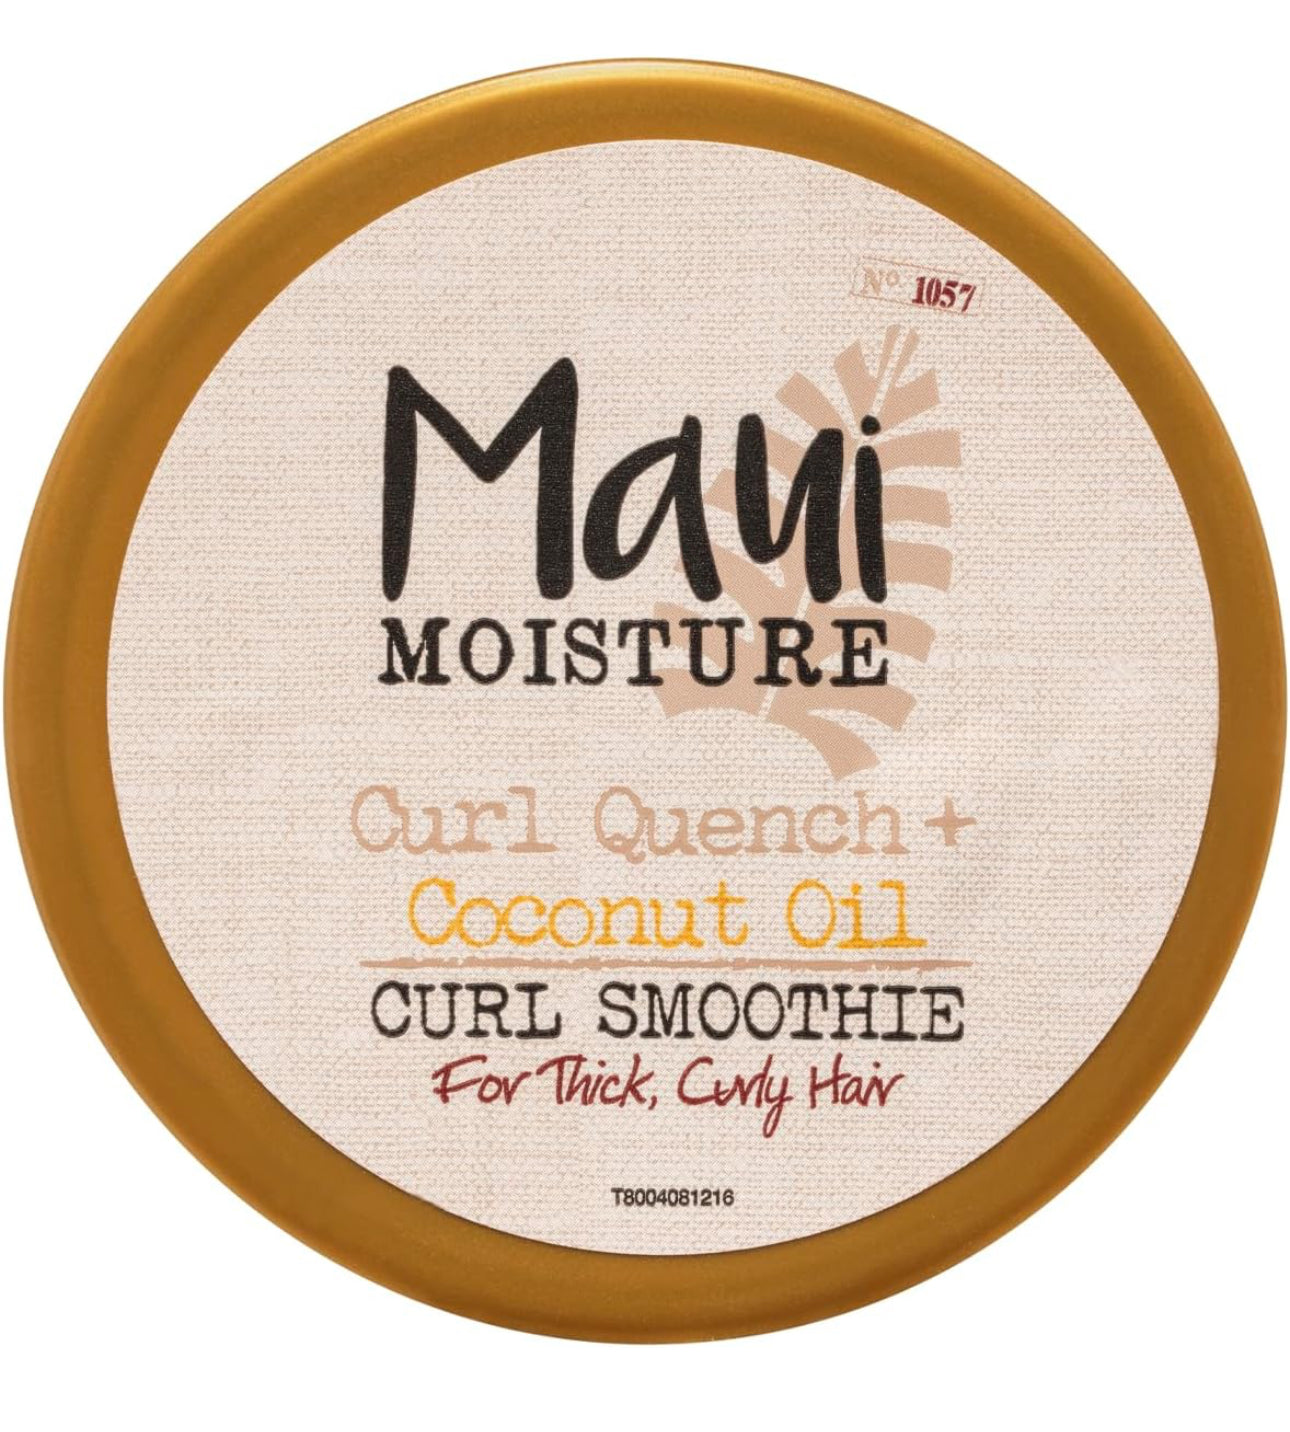 Maui Moisture Curl Quench + Coconut Oil Hydrating Curl Smoothie